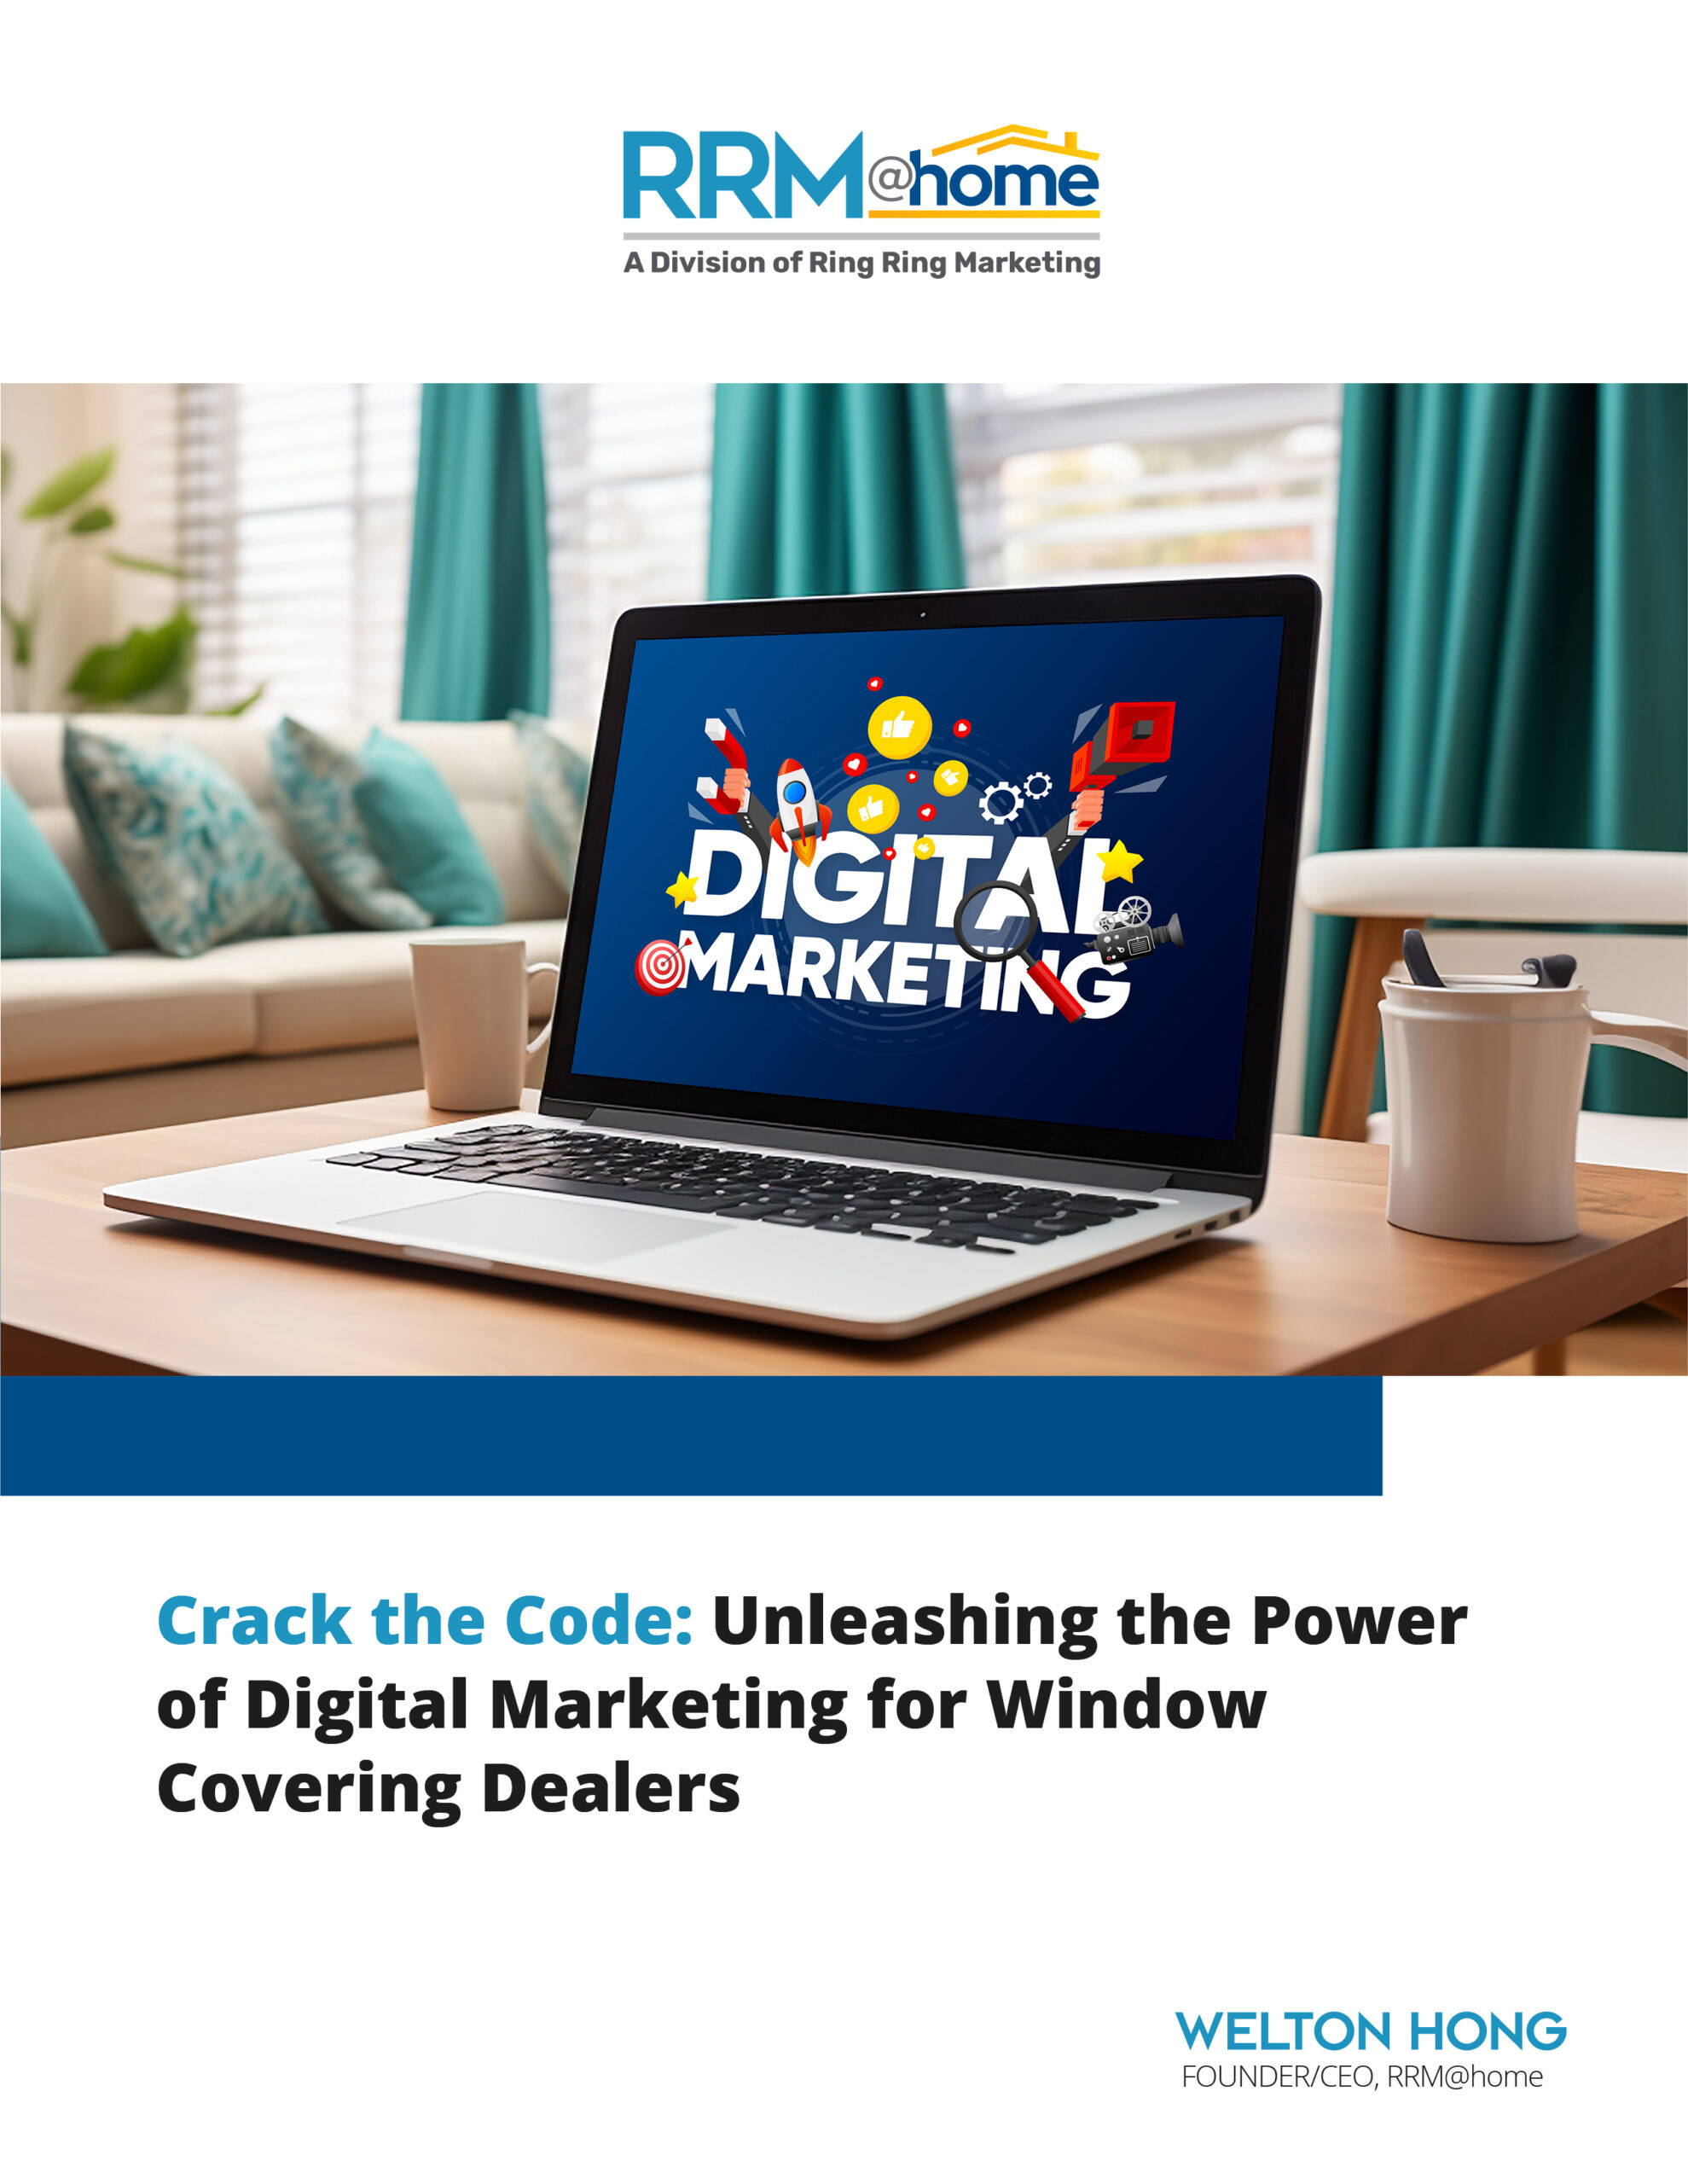 Crack the Code: Unleashing the Power of Digital Marketing for Window Covering Dealers